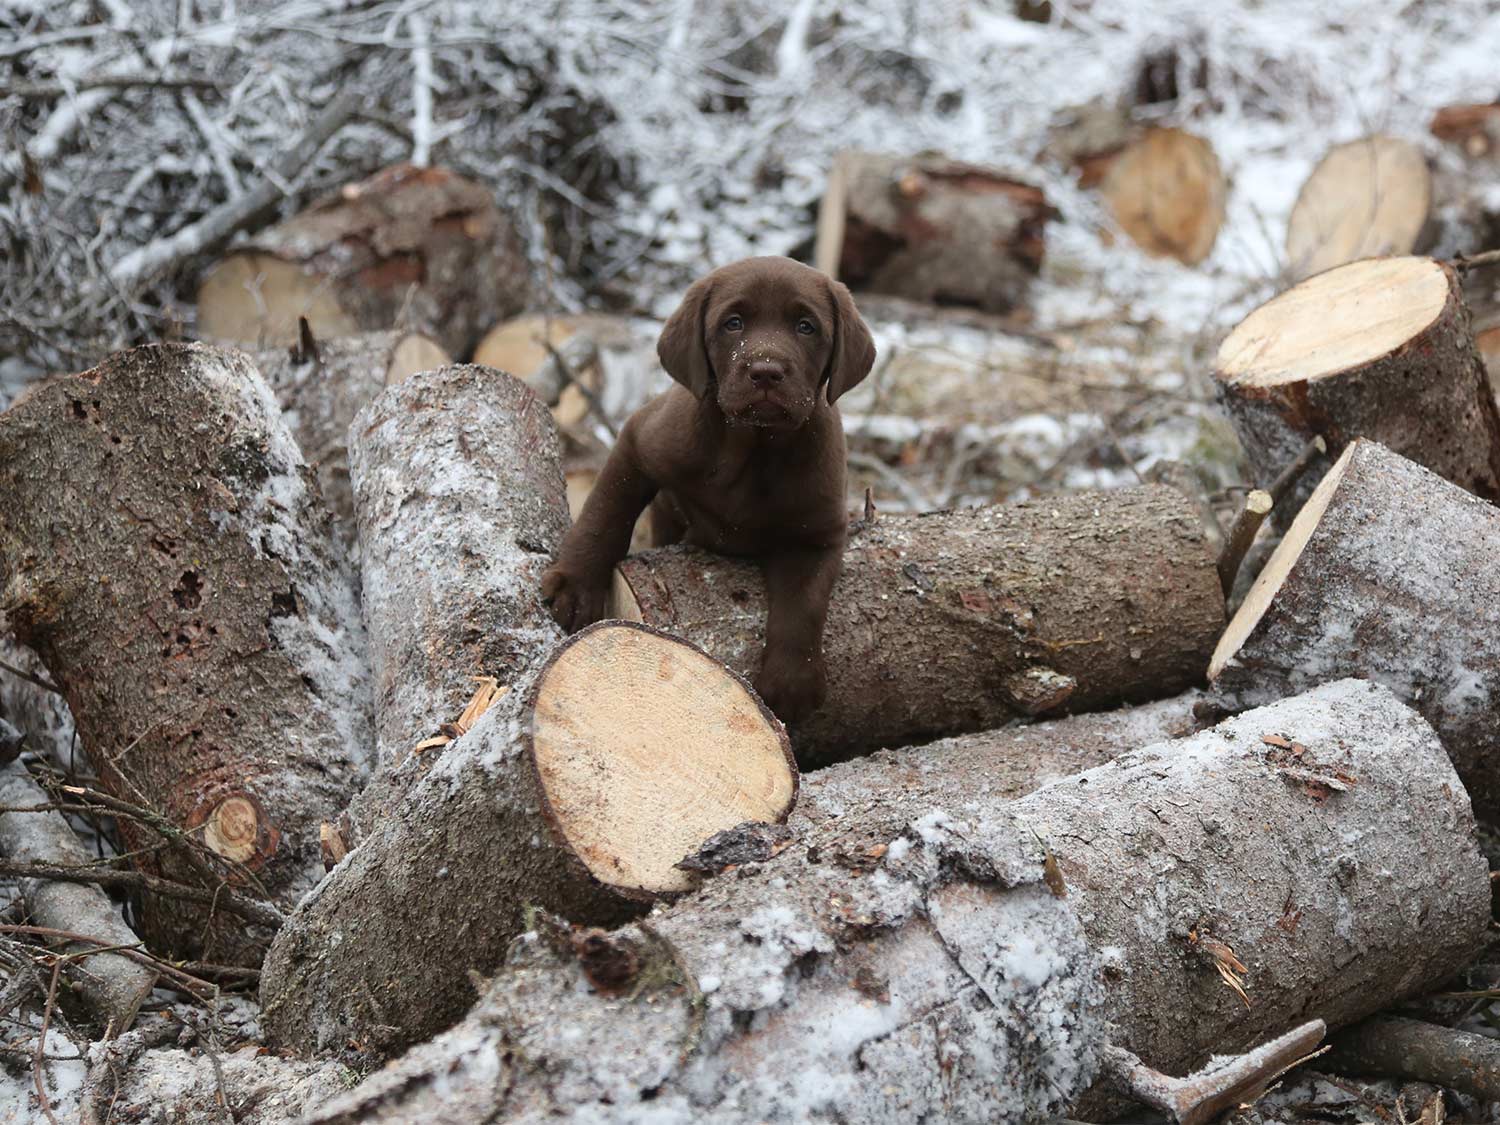 A chocolate lab puppy crawls through chopped trees in the snow.